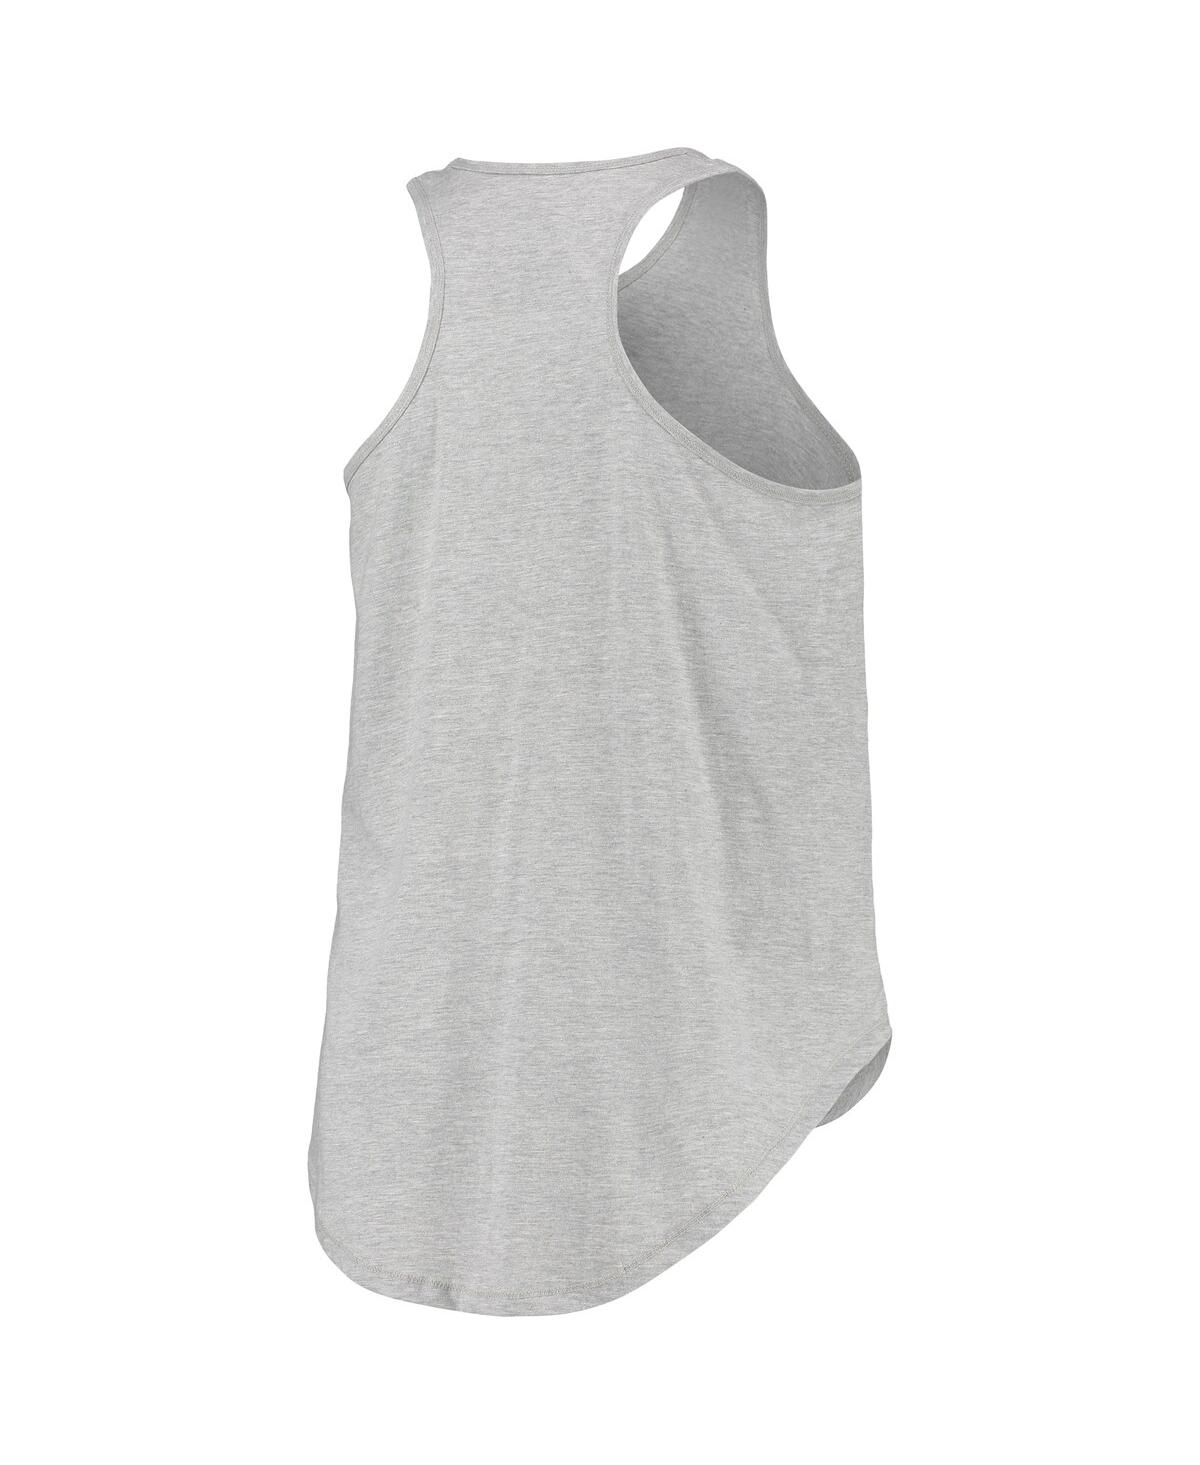 Shop Profile Women's Cleveland Browns Heathered Gray Plus Size Team Racerback Tank Top